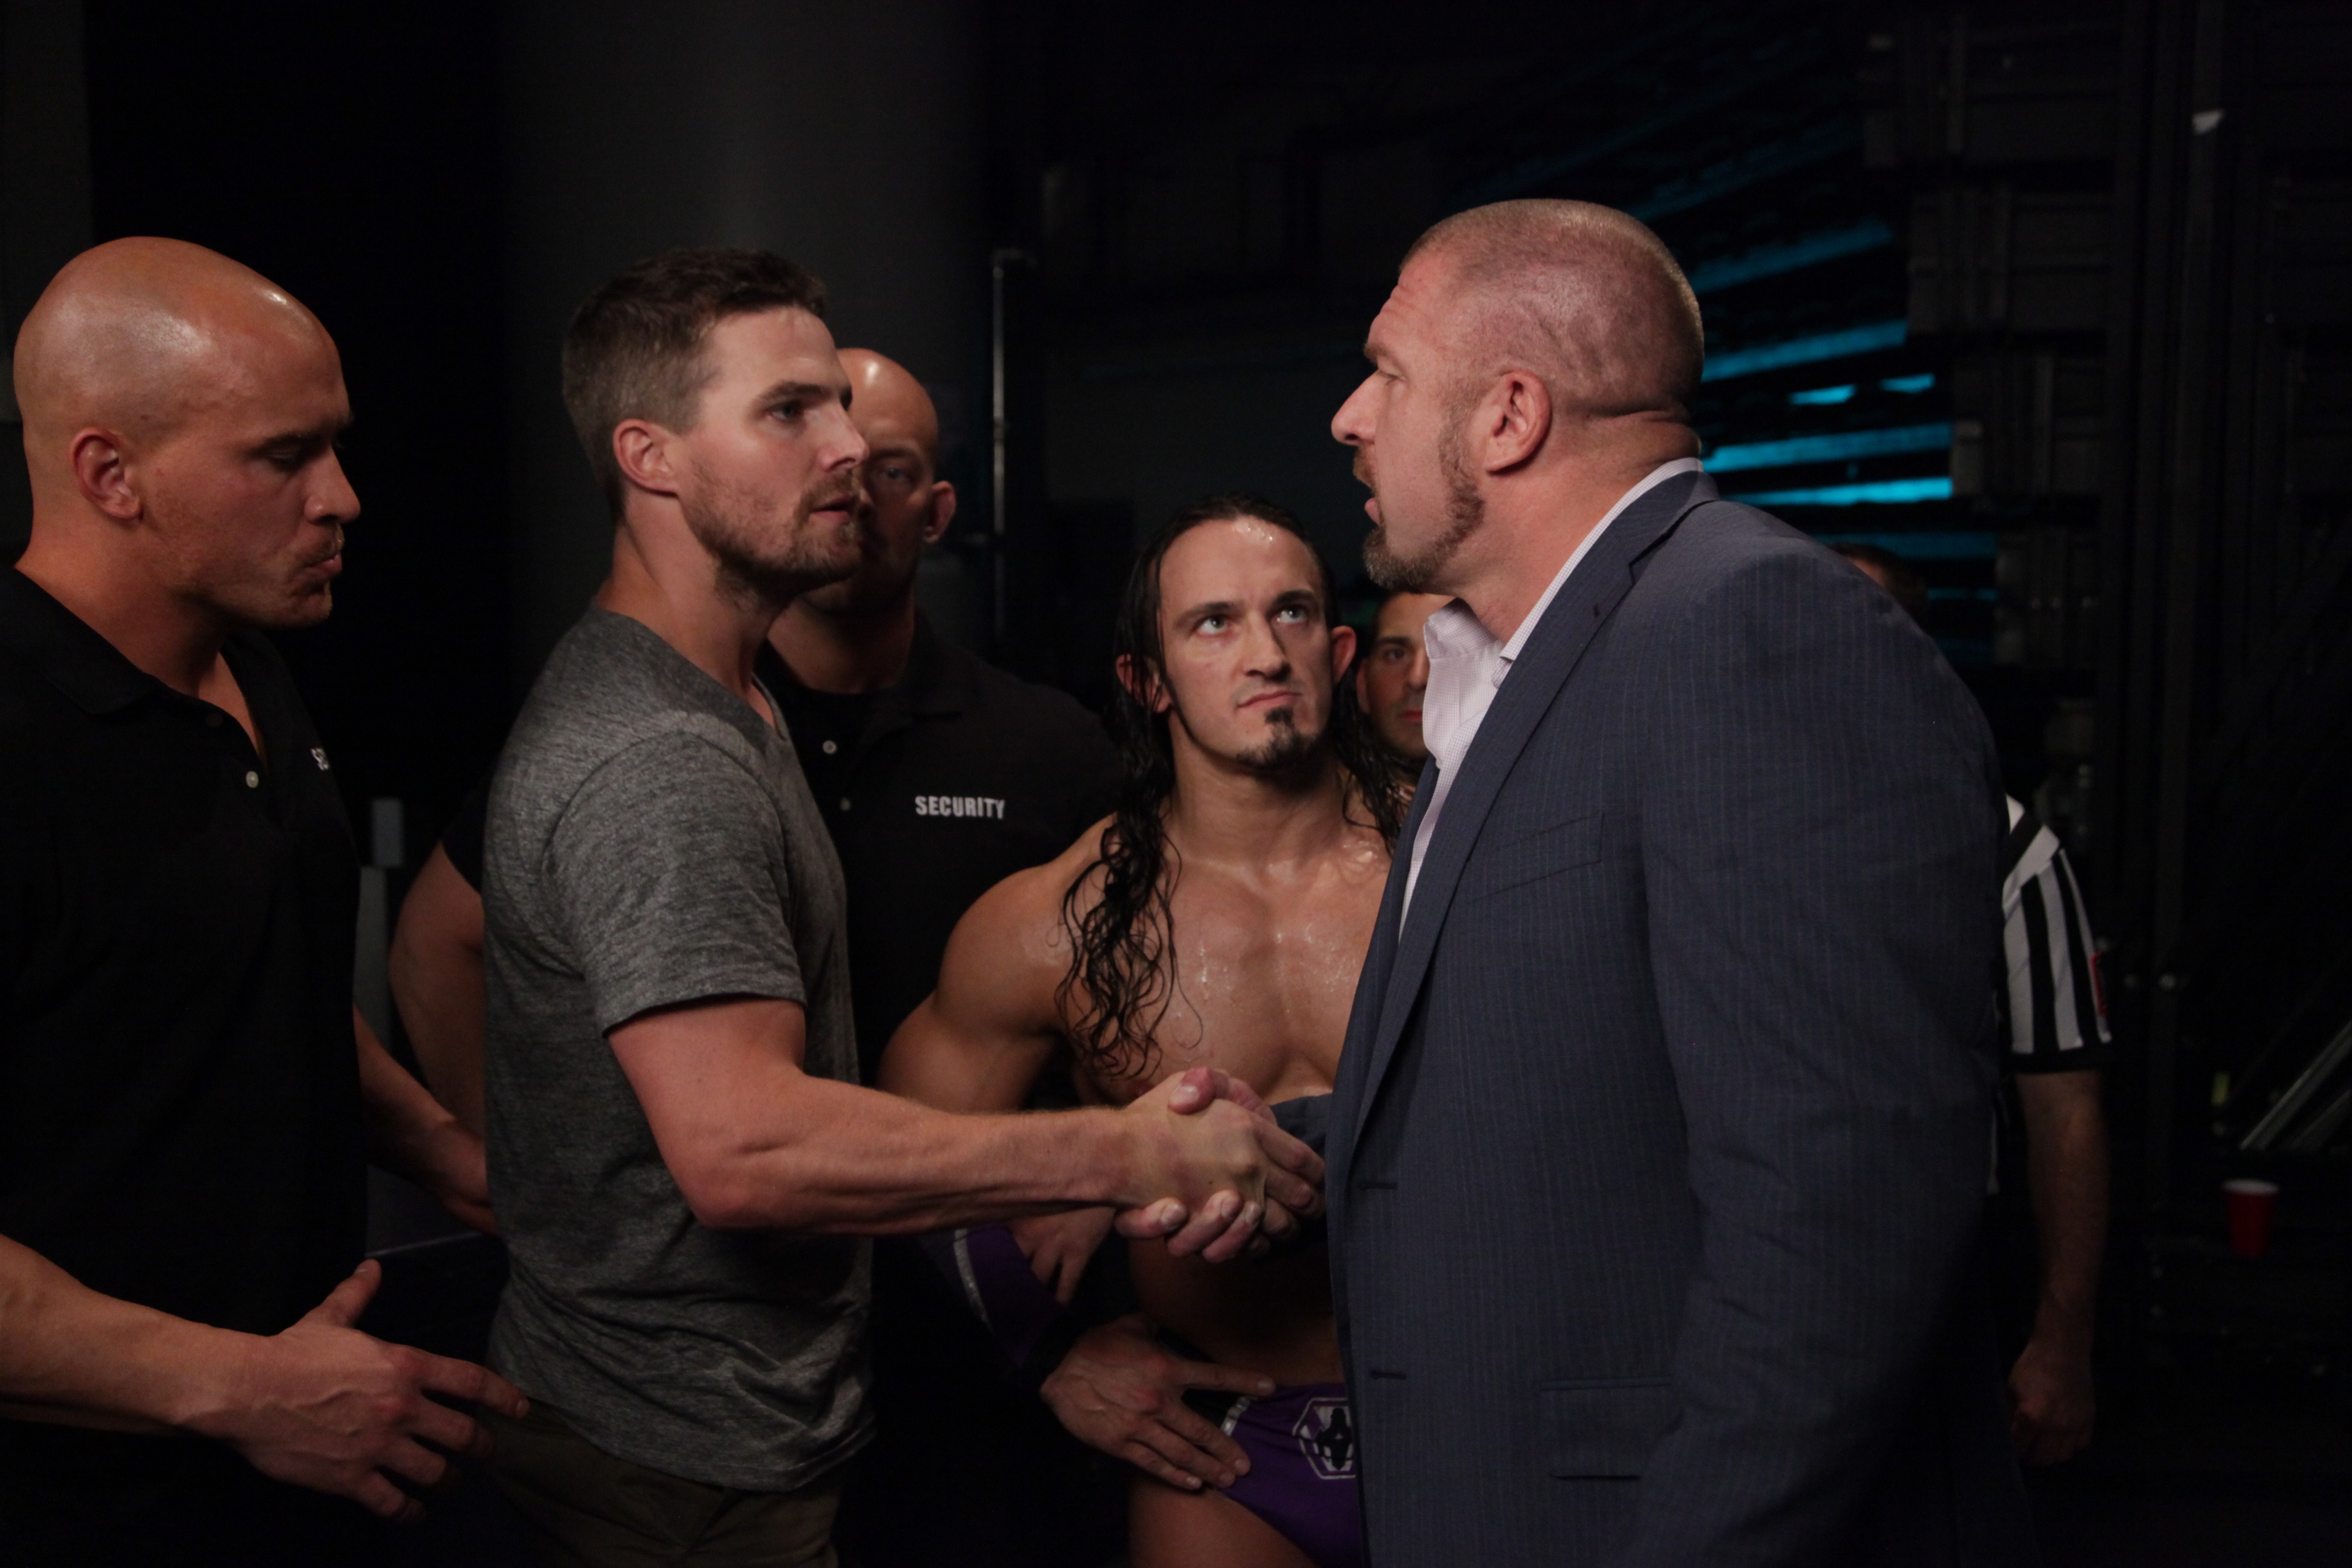 Stephen Amell and Triple H